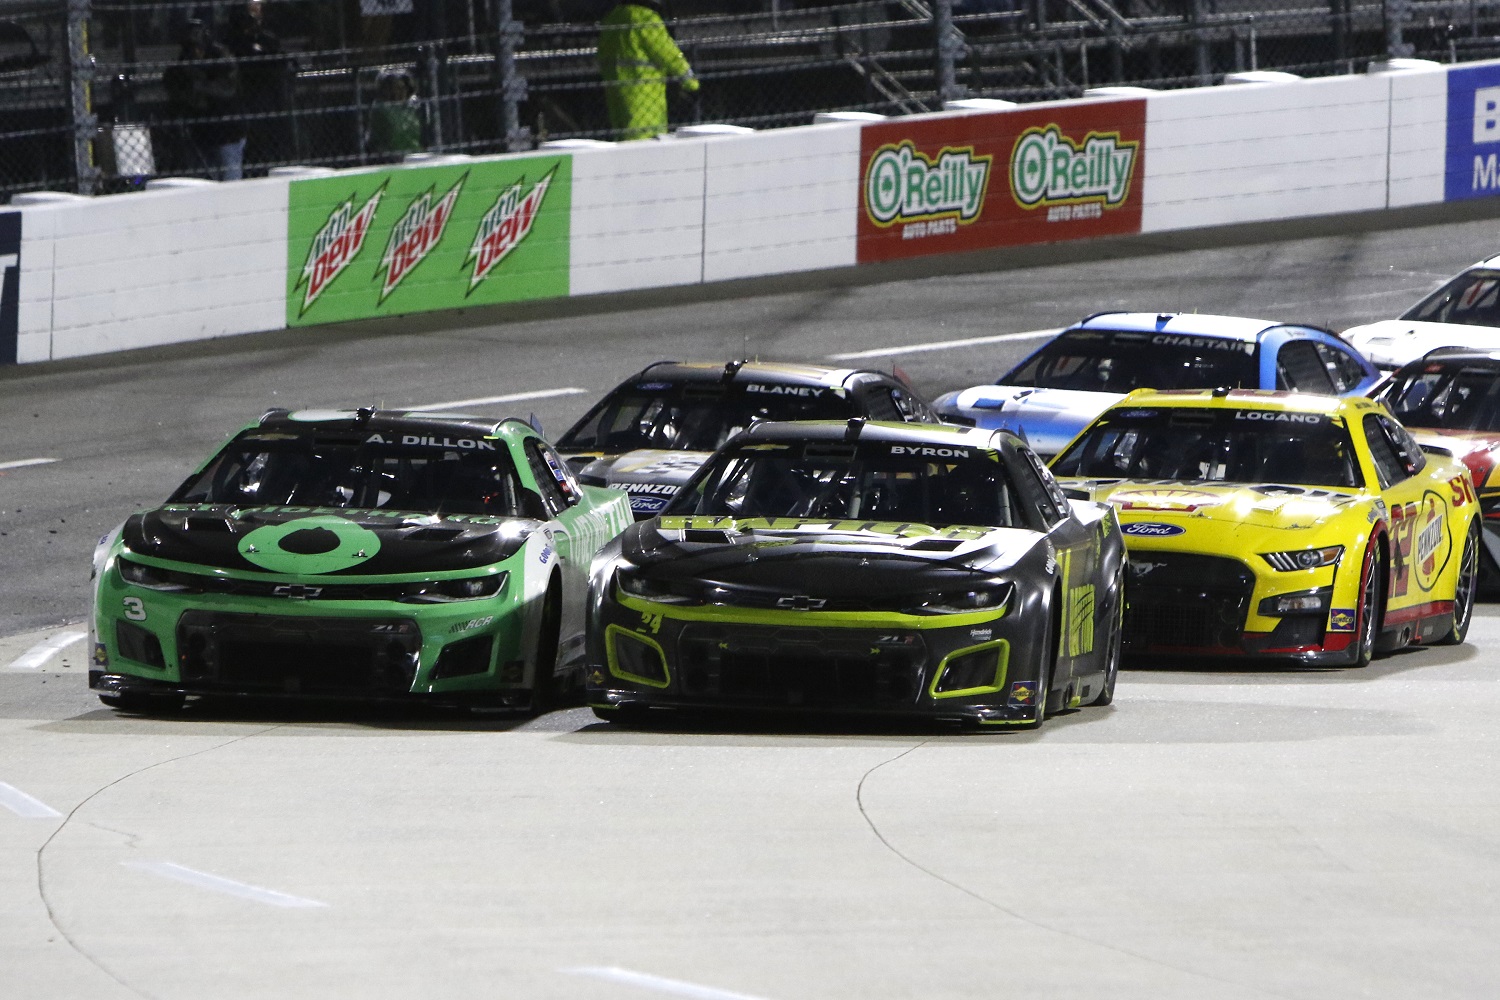 A late restart for William Byron (No. 24 Chevrolet) and Austin Dillon (No. 3 Chevrolet) during the NASCAR Cup Series Blue-Emu Maximum Pain Relief 400 on April 9, 2022, at Martinsville Speedway. | Jeff Robinson/Icon Sportswire via Getty Images